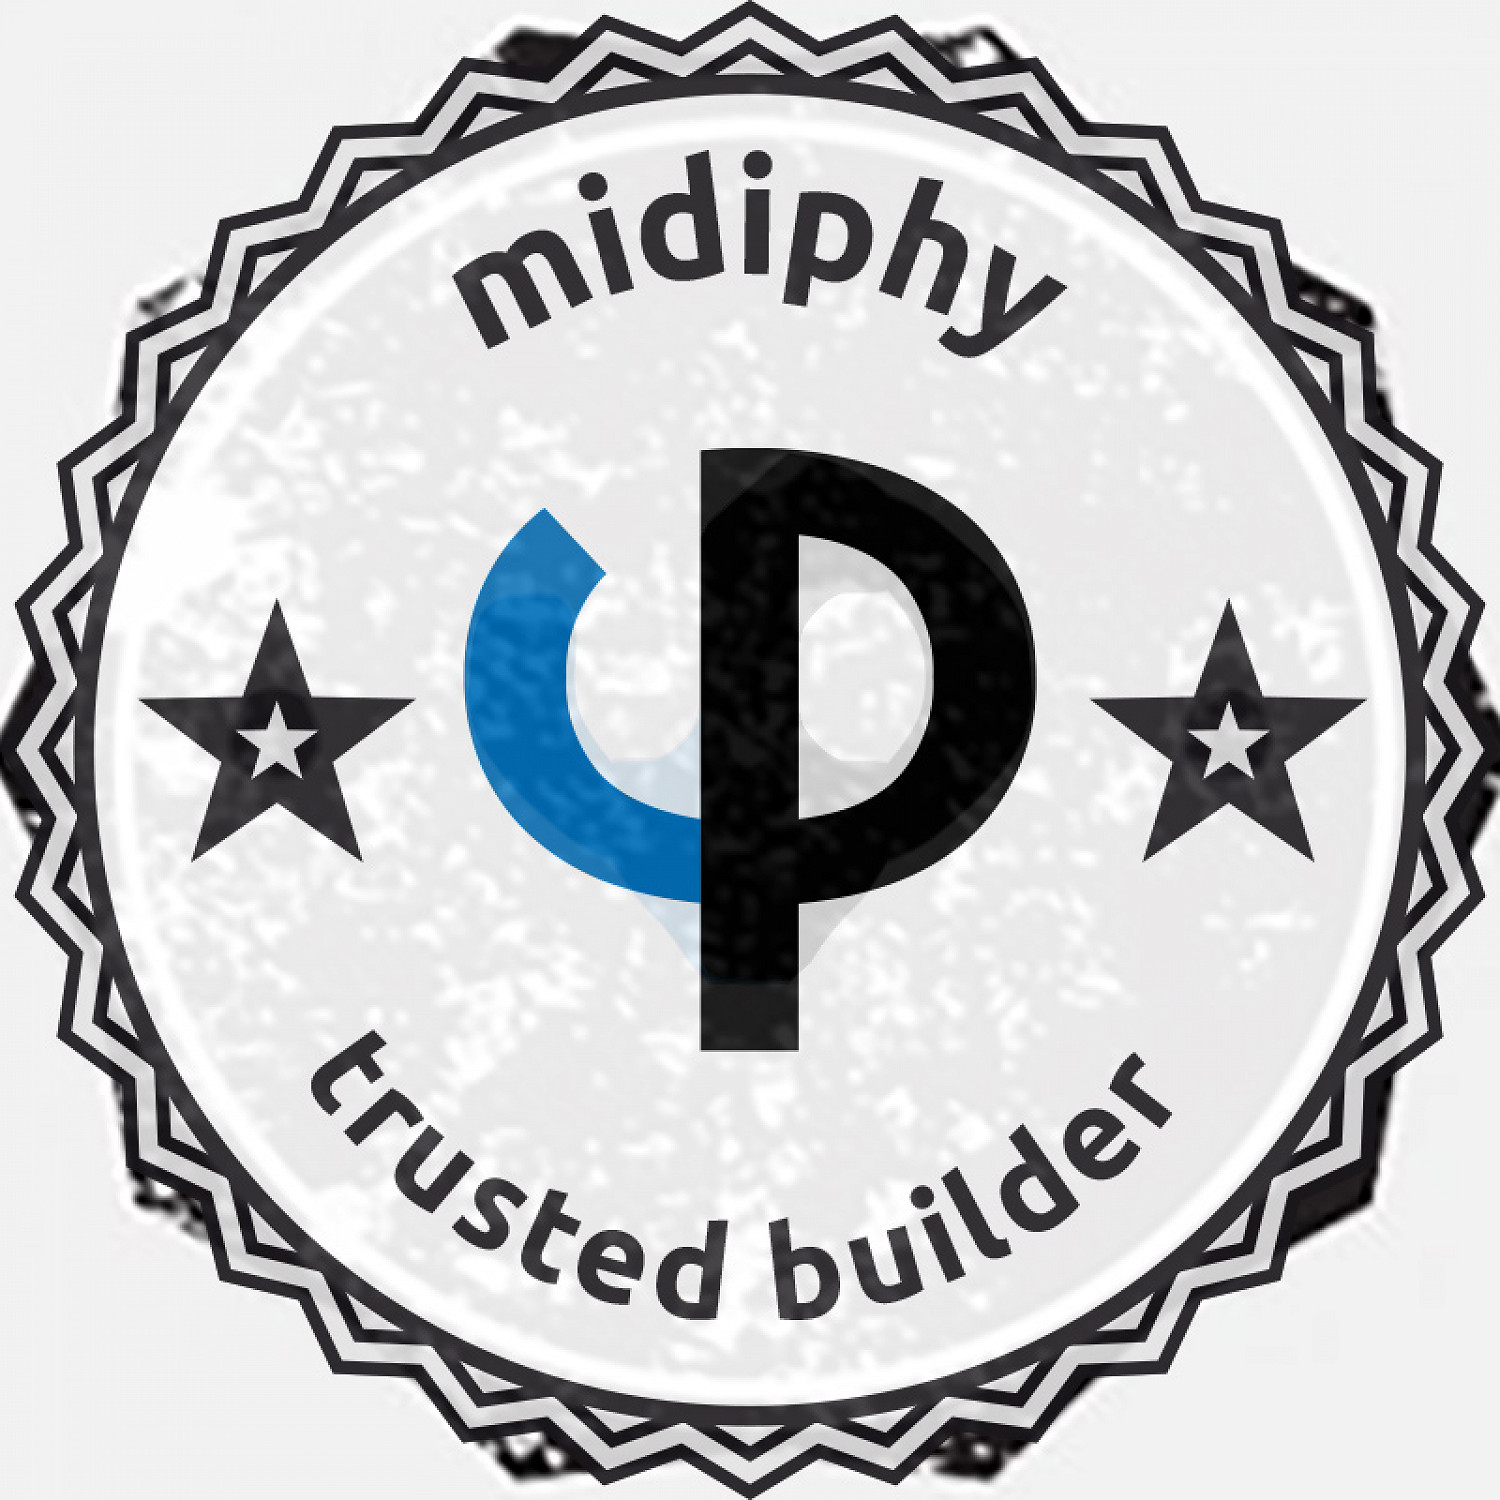 www.midiphy.com